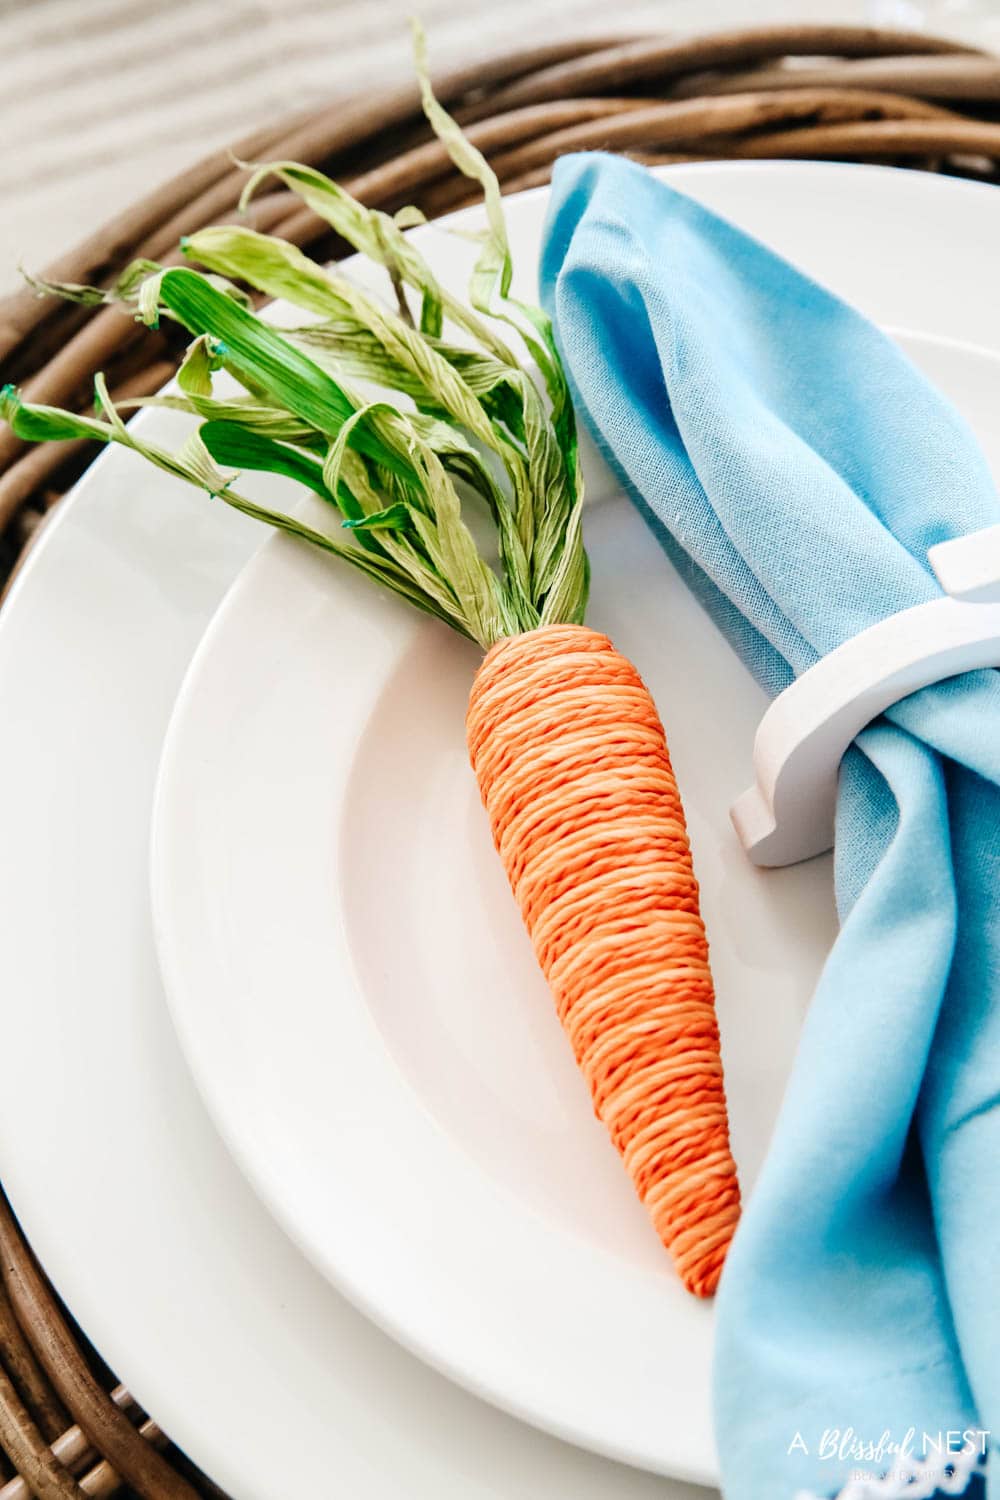 Jute two toned carrot resting on a white plate next to a blue napkin